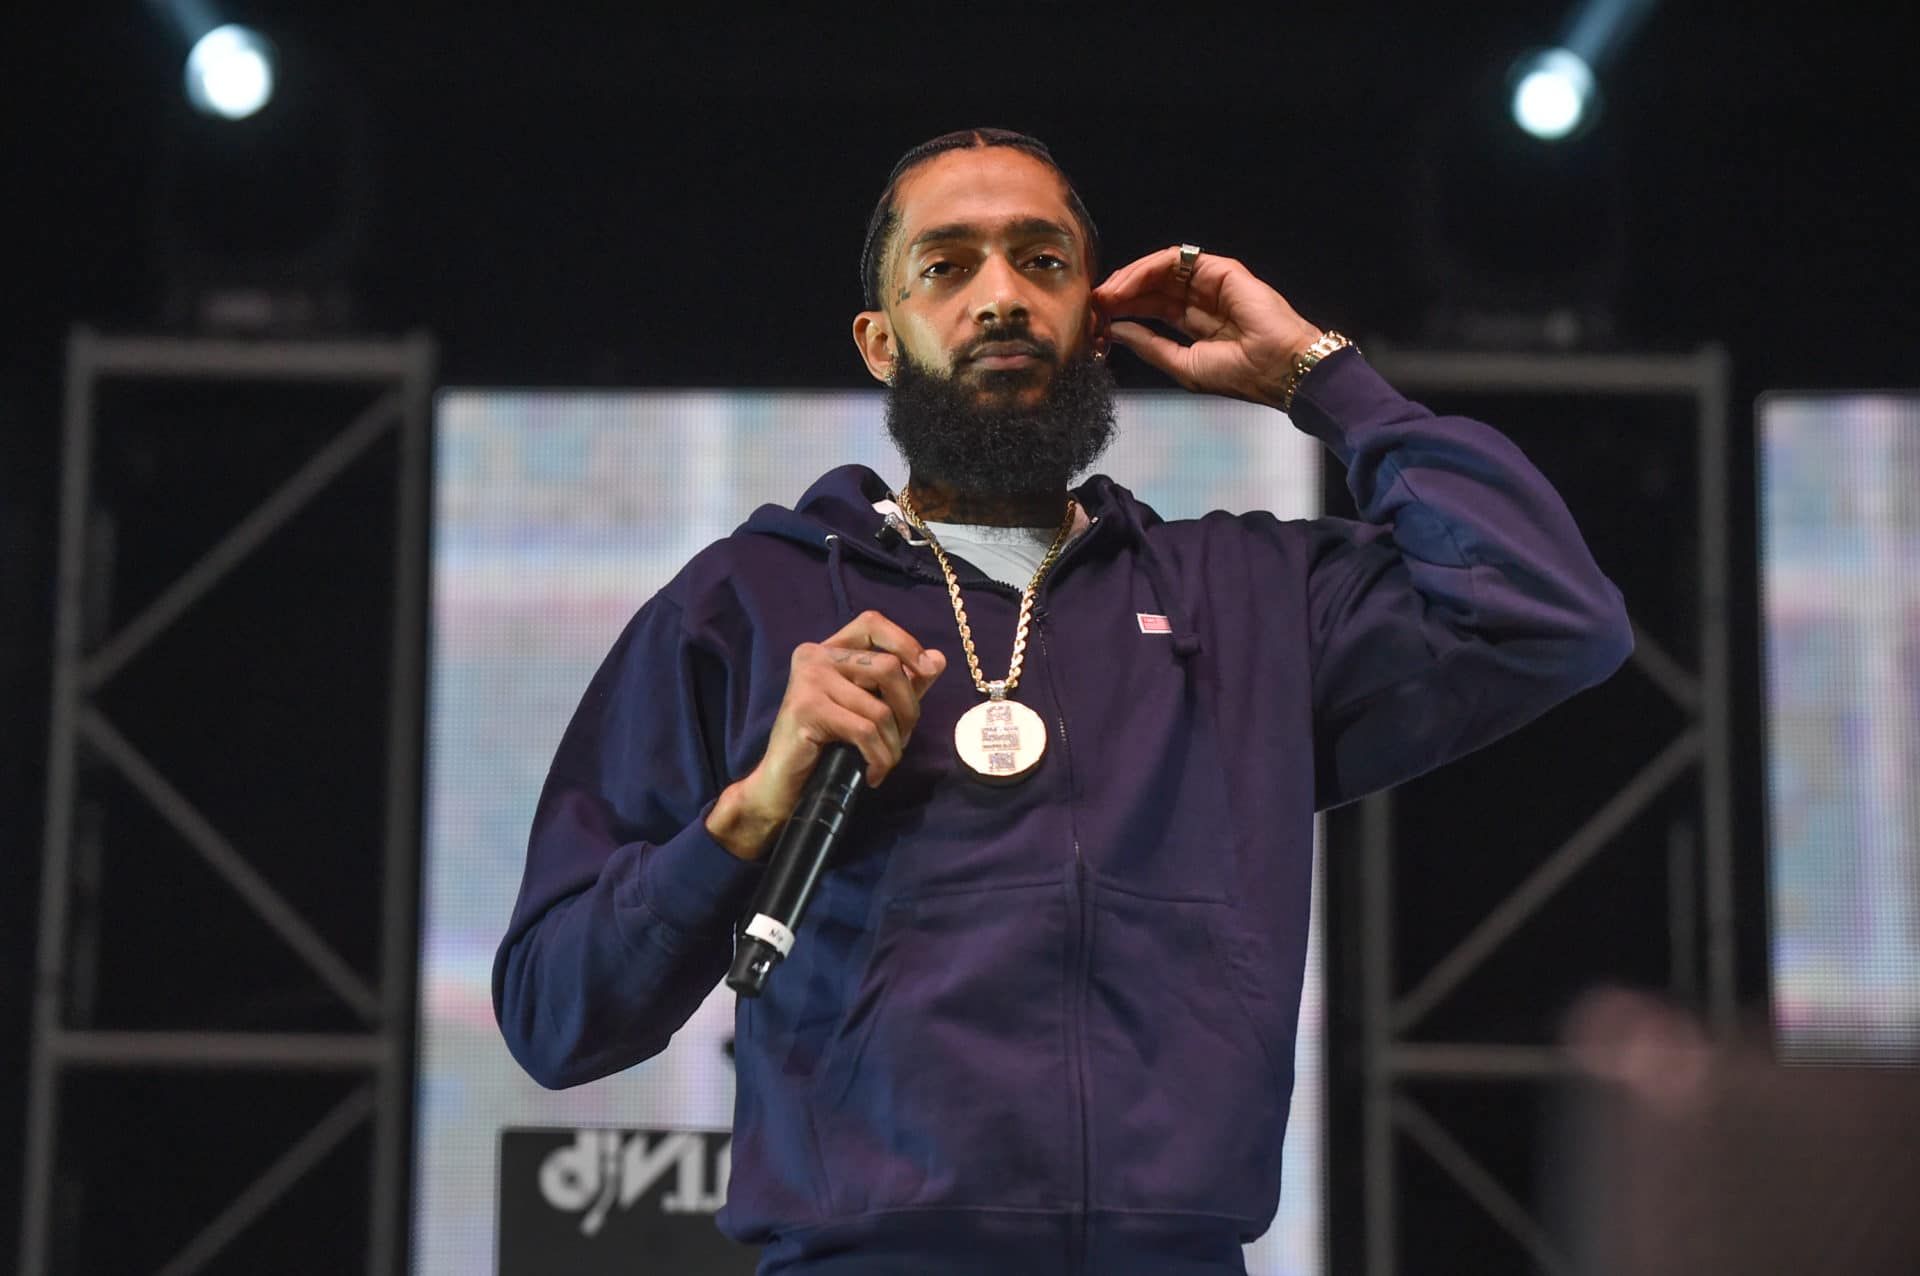 Nipsey Hussle's Memorial Service Sold Out In 20 Minutes